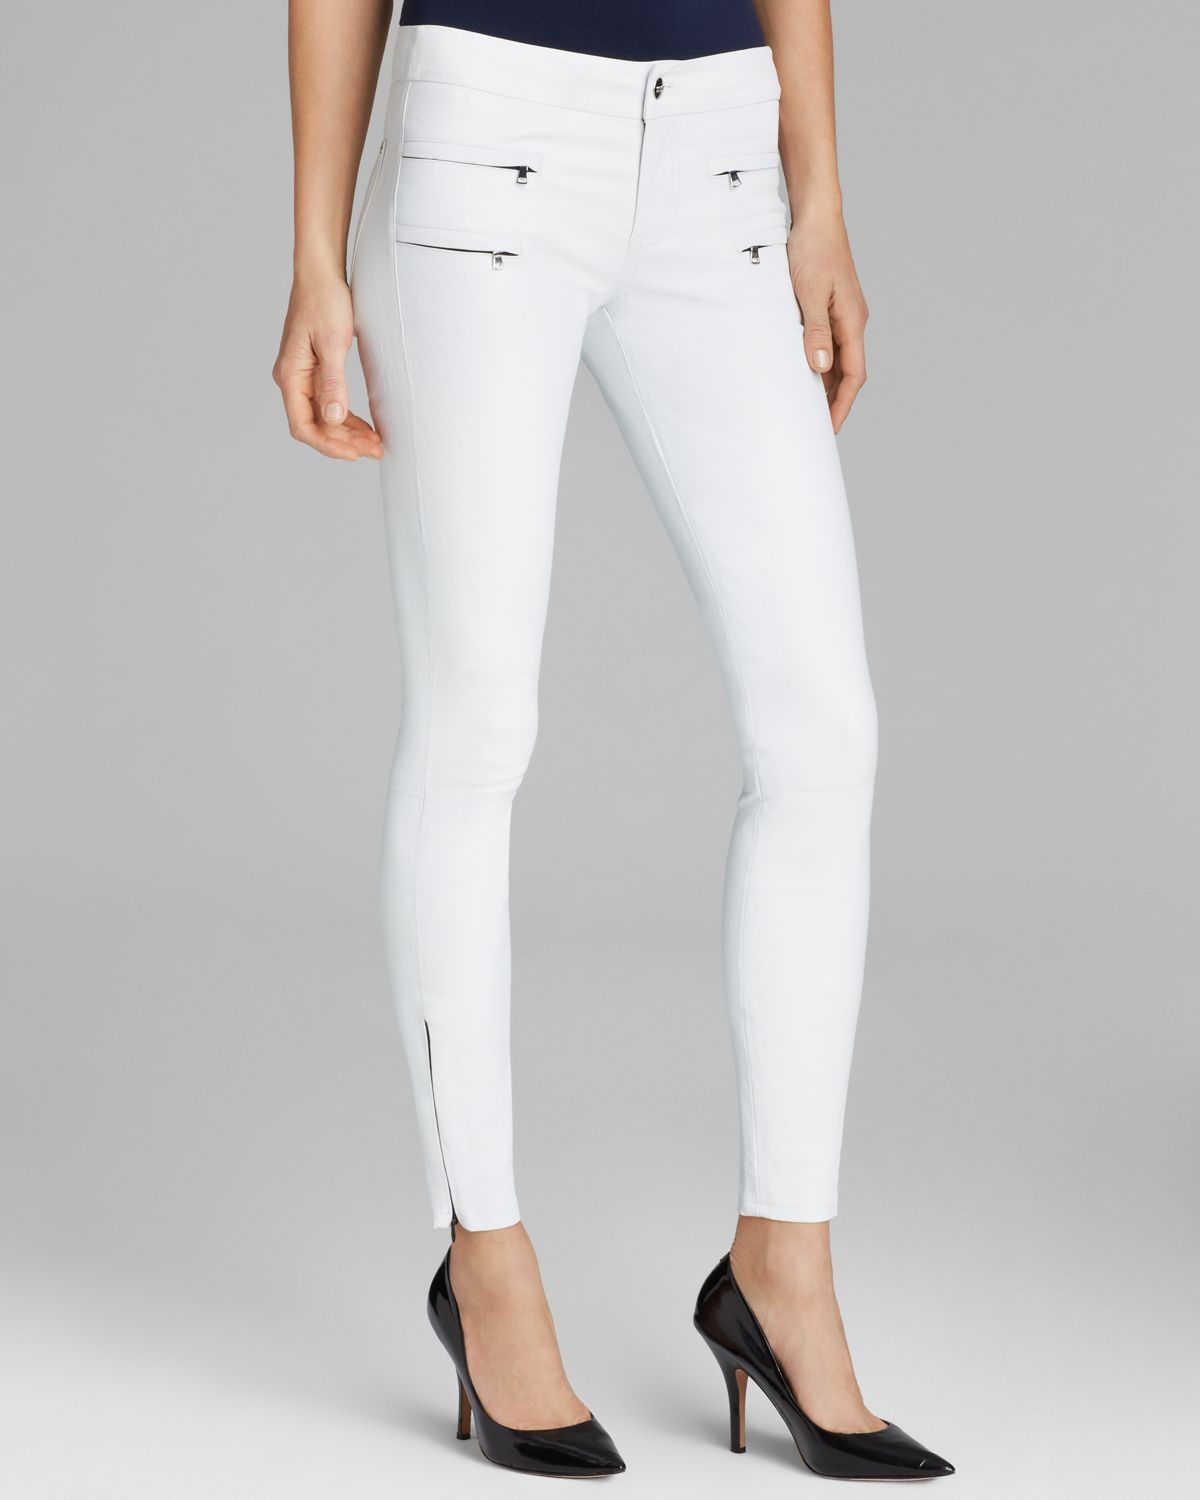 white leather jeans